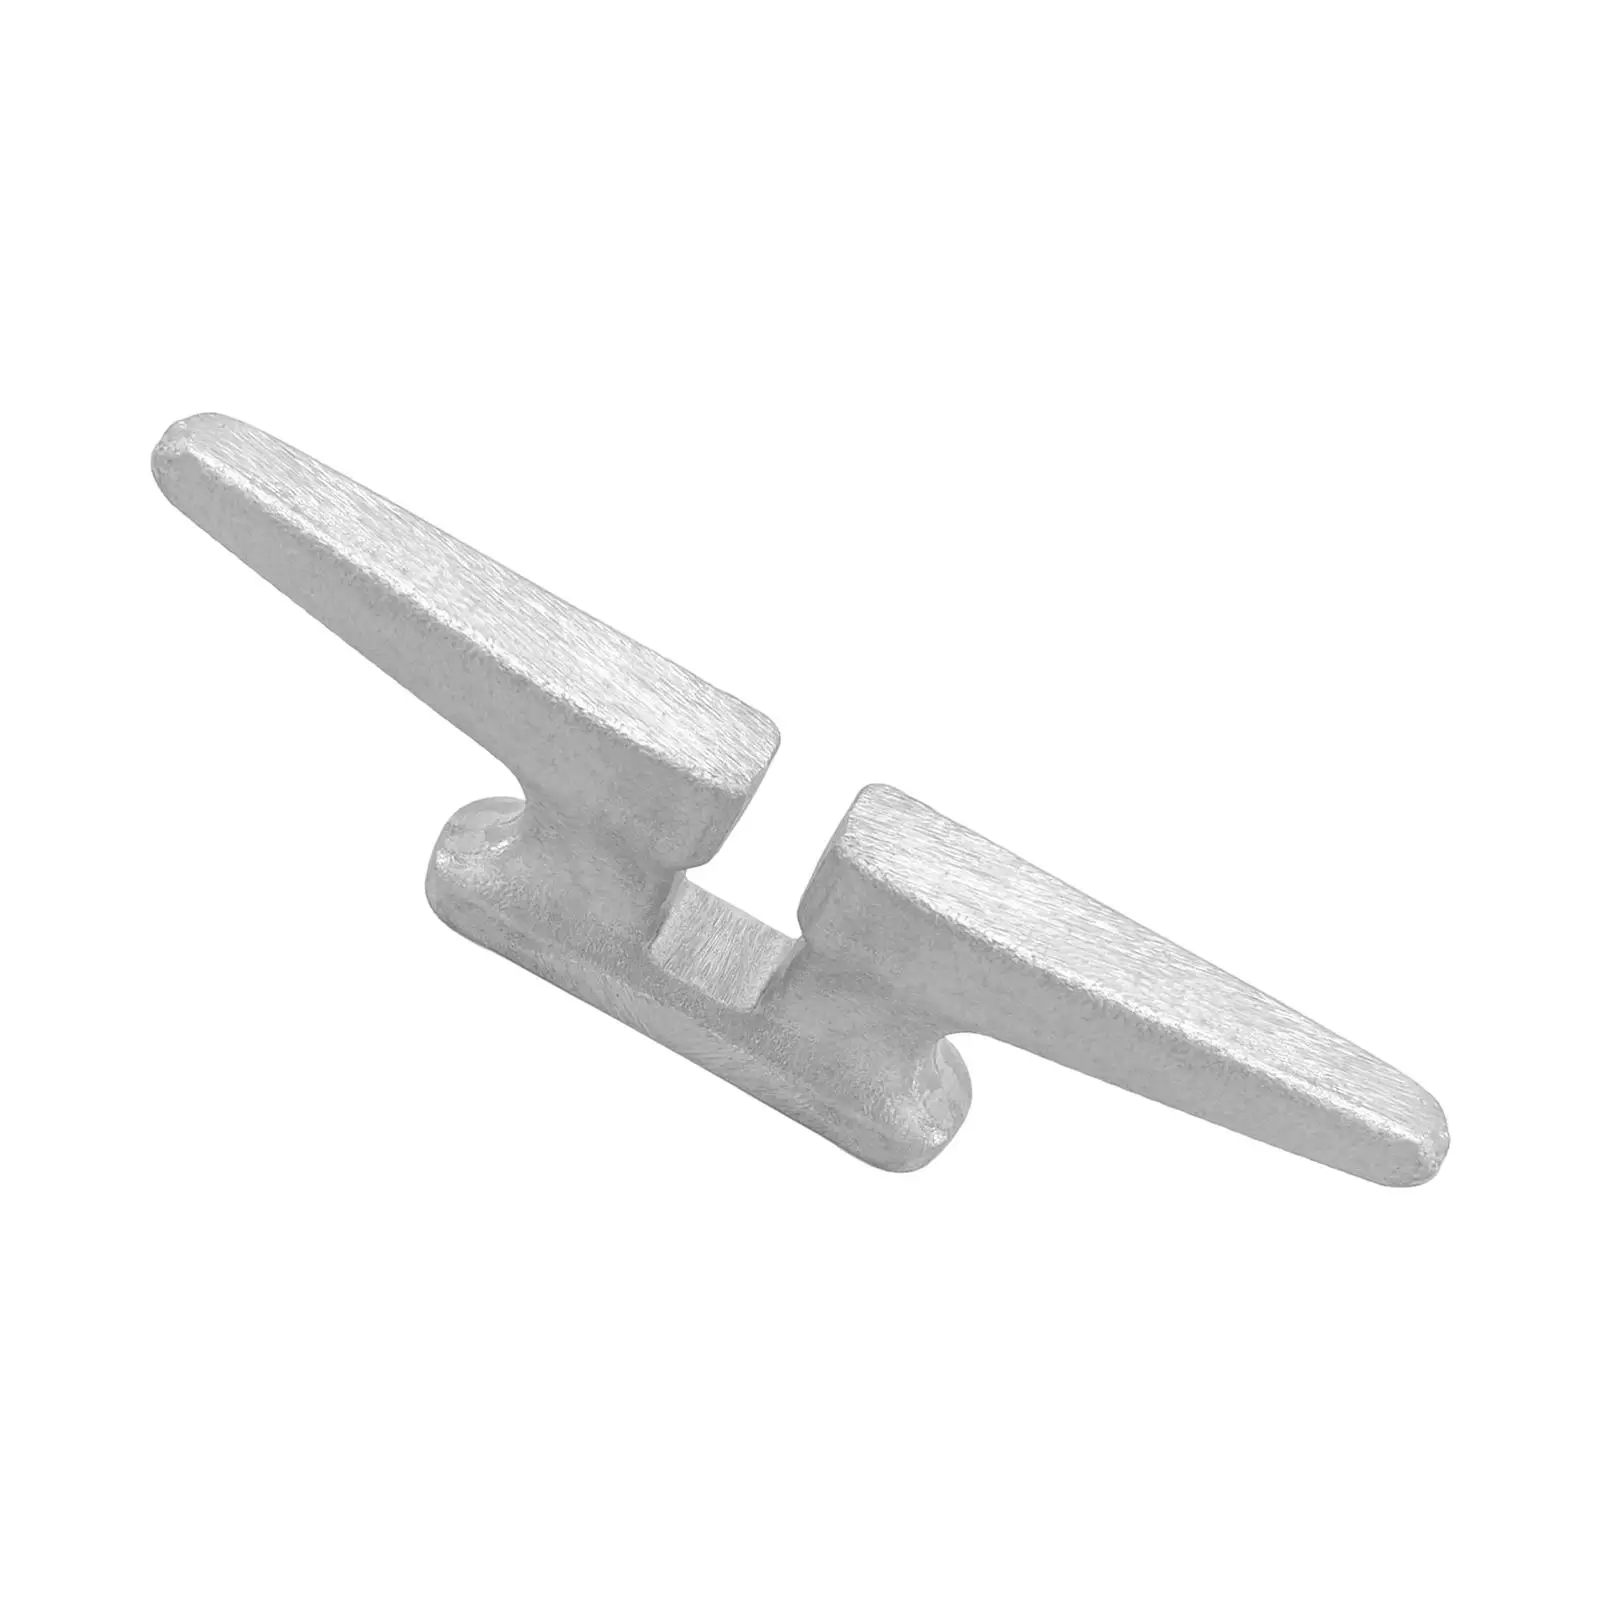 Boat Cleat Easy Installation Dock Cleat for Decorative Applications Sailing